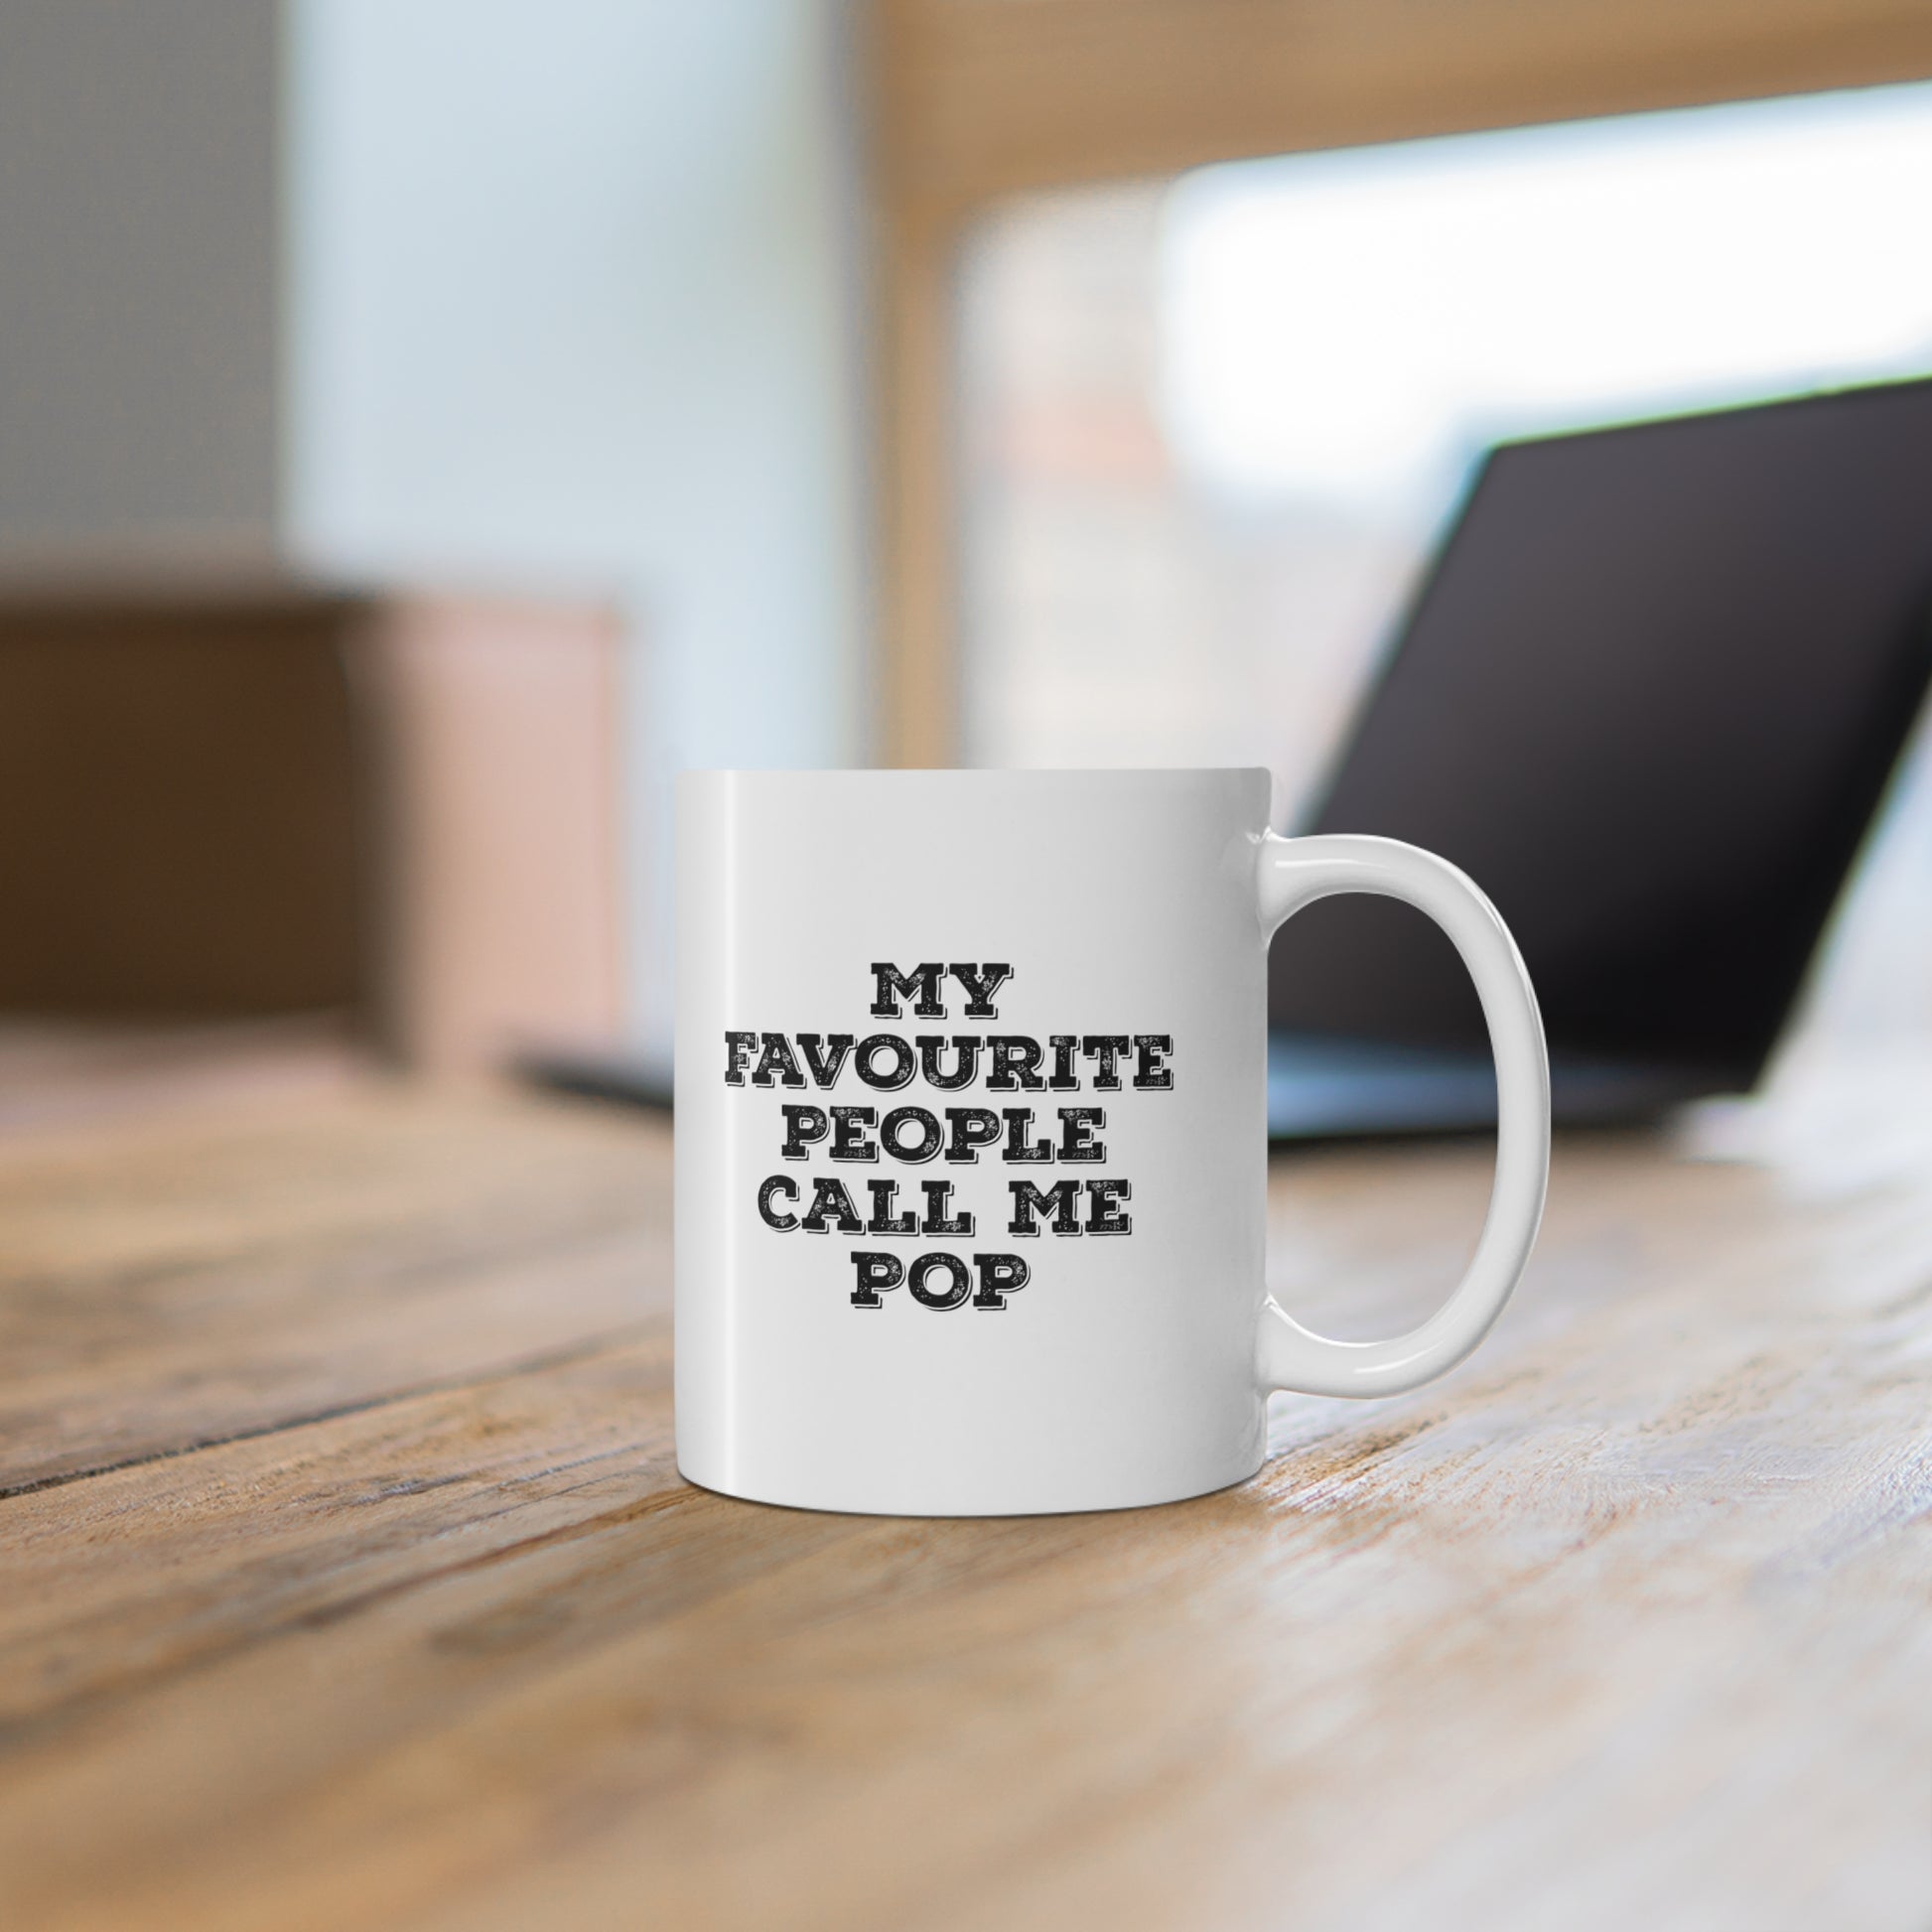 11oz ceramic mug with quote My Favourite People Call Me Pop